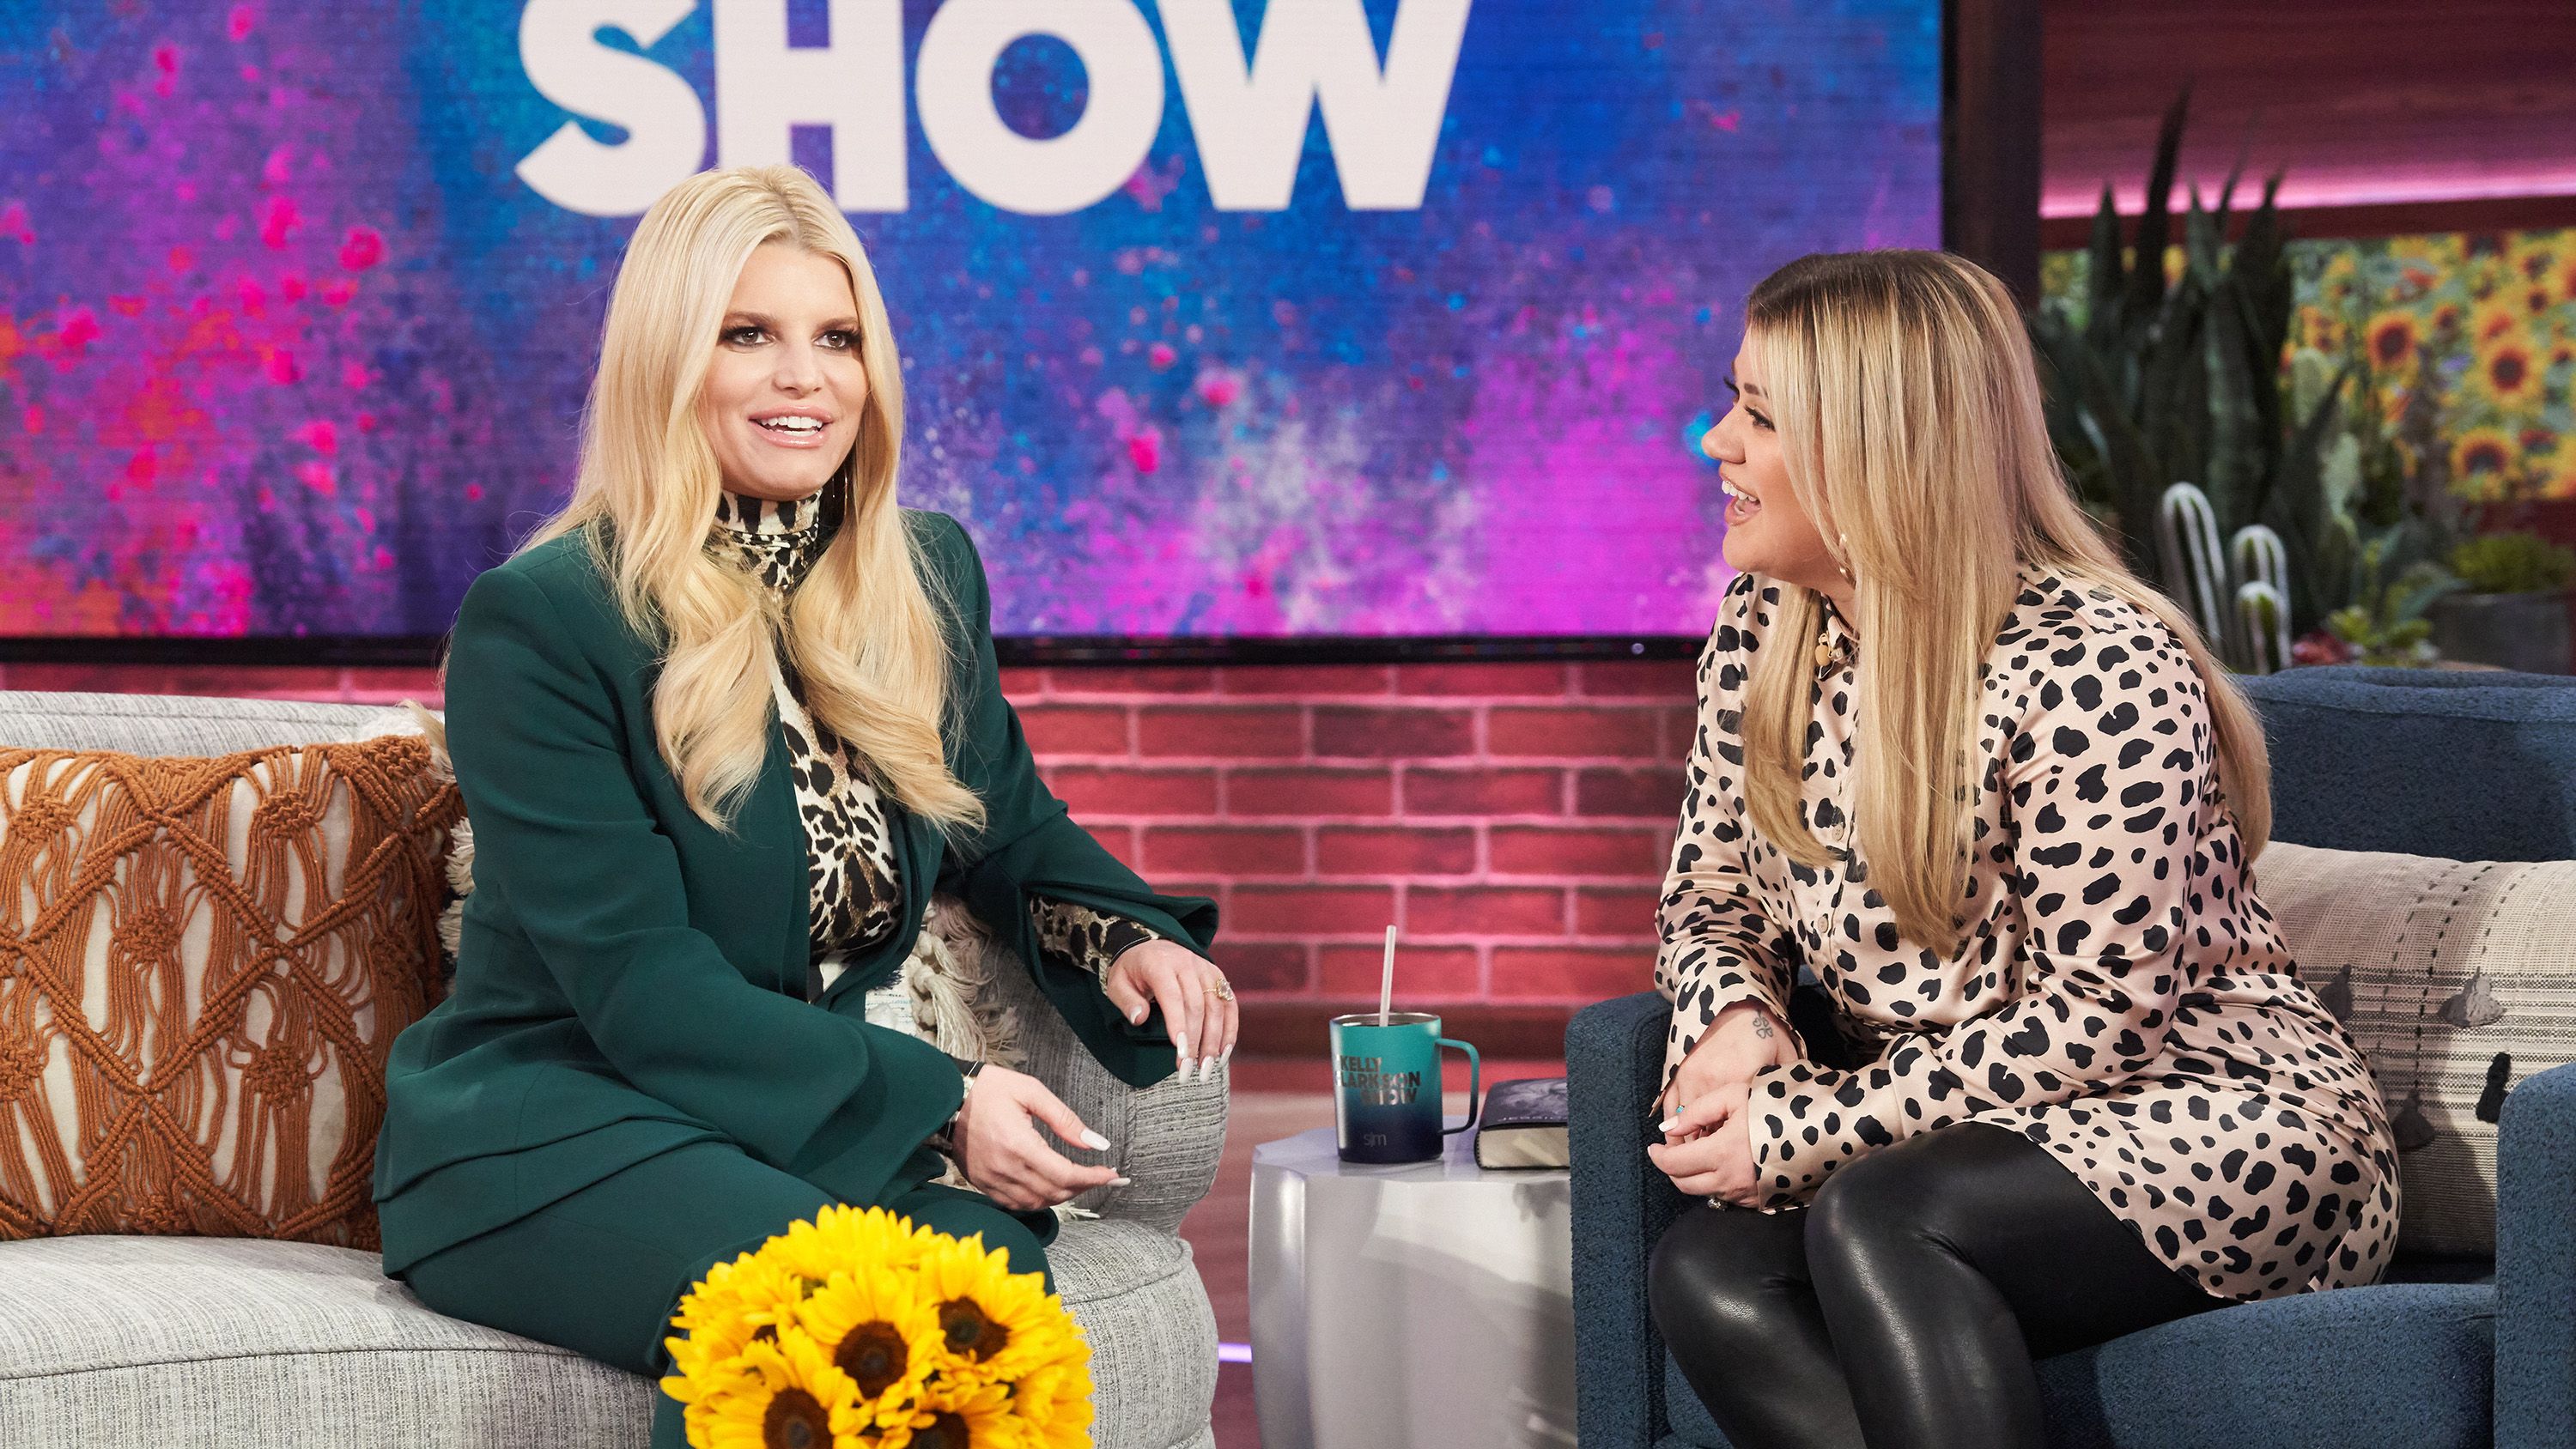 https://hips.hearstapps.com/hmg-prod/images/episode-3117-pictured-jessica-simpson-kelly-clarkson-news-photo-1635795247.jpg?crop=1xw:0.84375xh;center,top